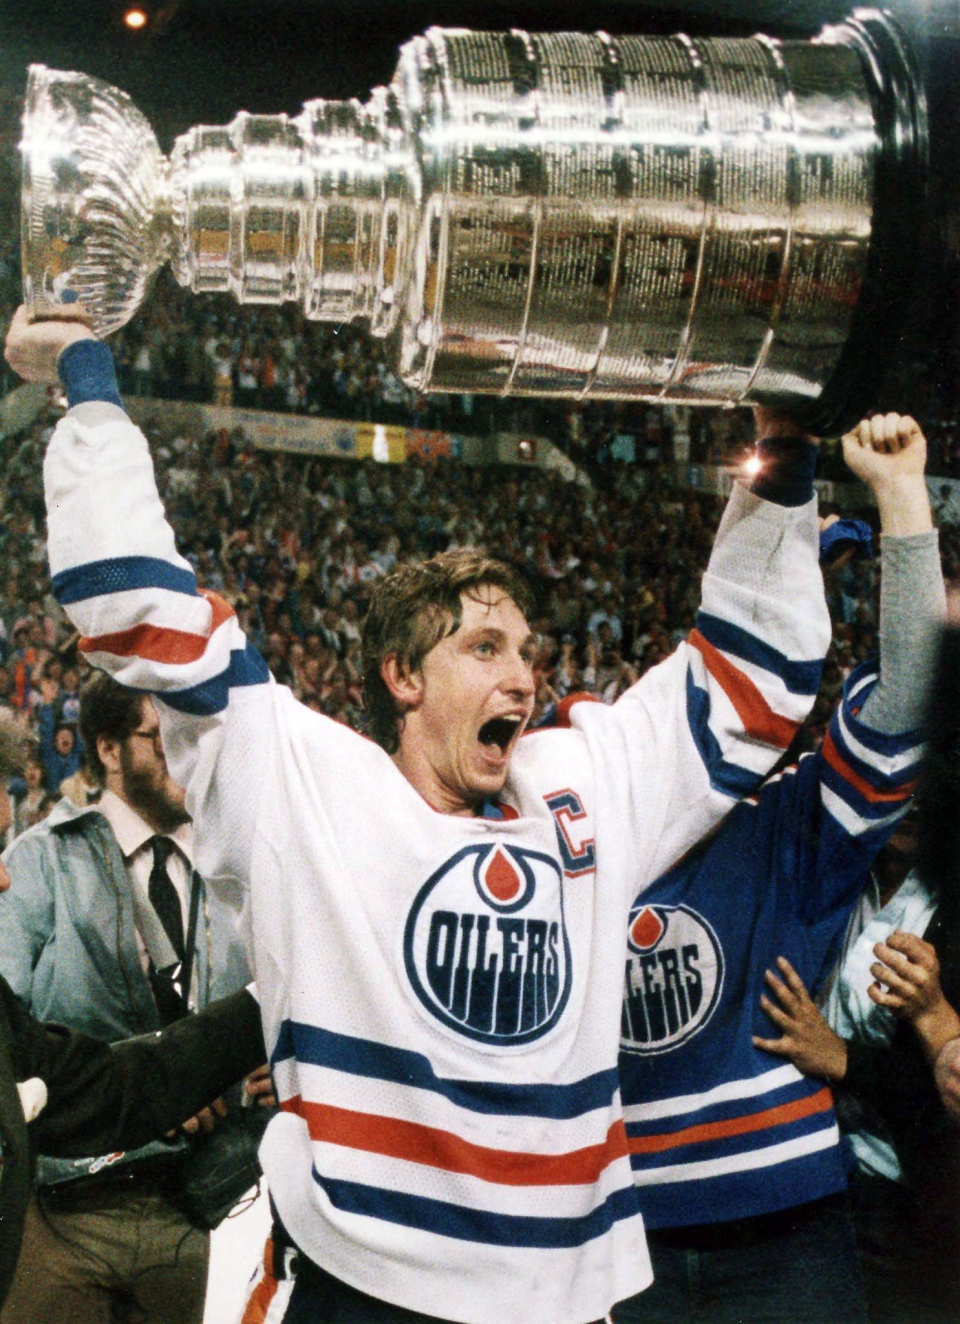 Oilers announce celebration to mark 30 years since 1984 Stanley Cup win